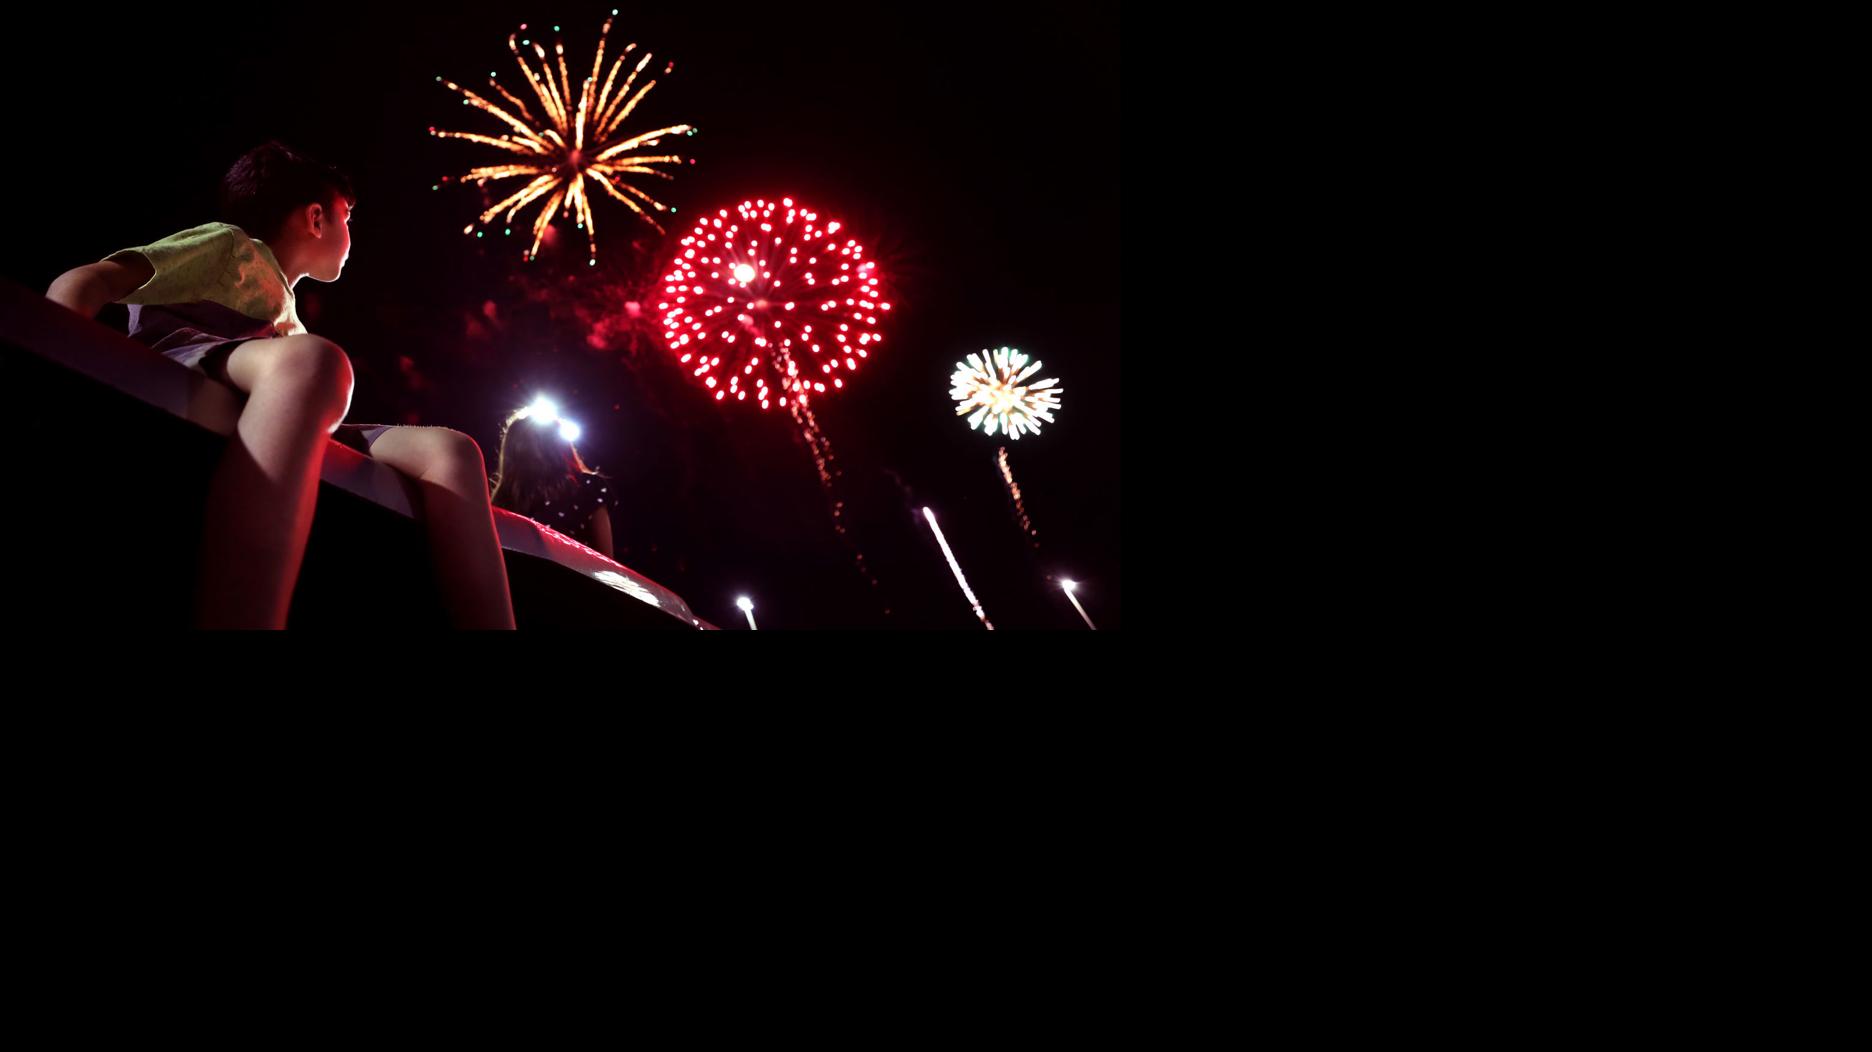 Southern Arizona 4th of July events, activities and fireworks for 2021